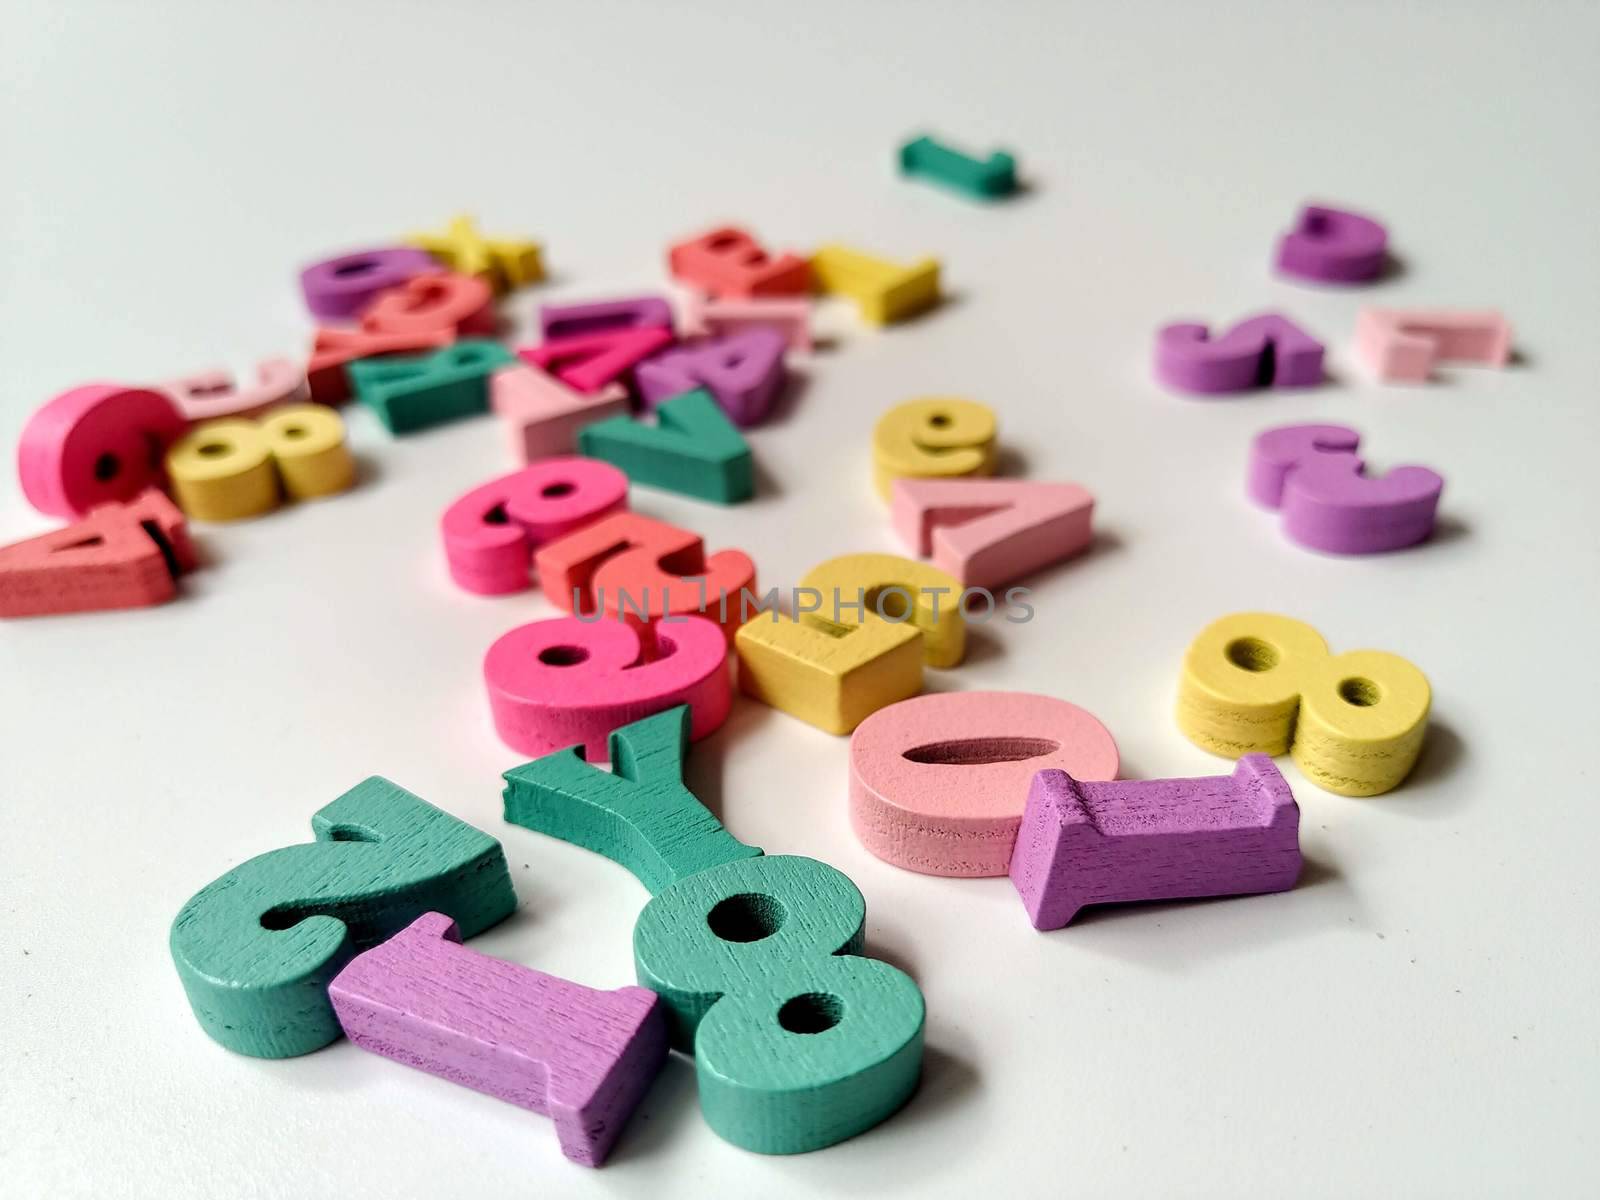 Children's colored letters placed on a white background.